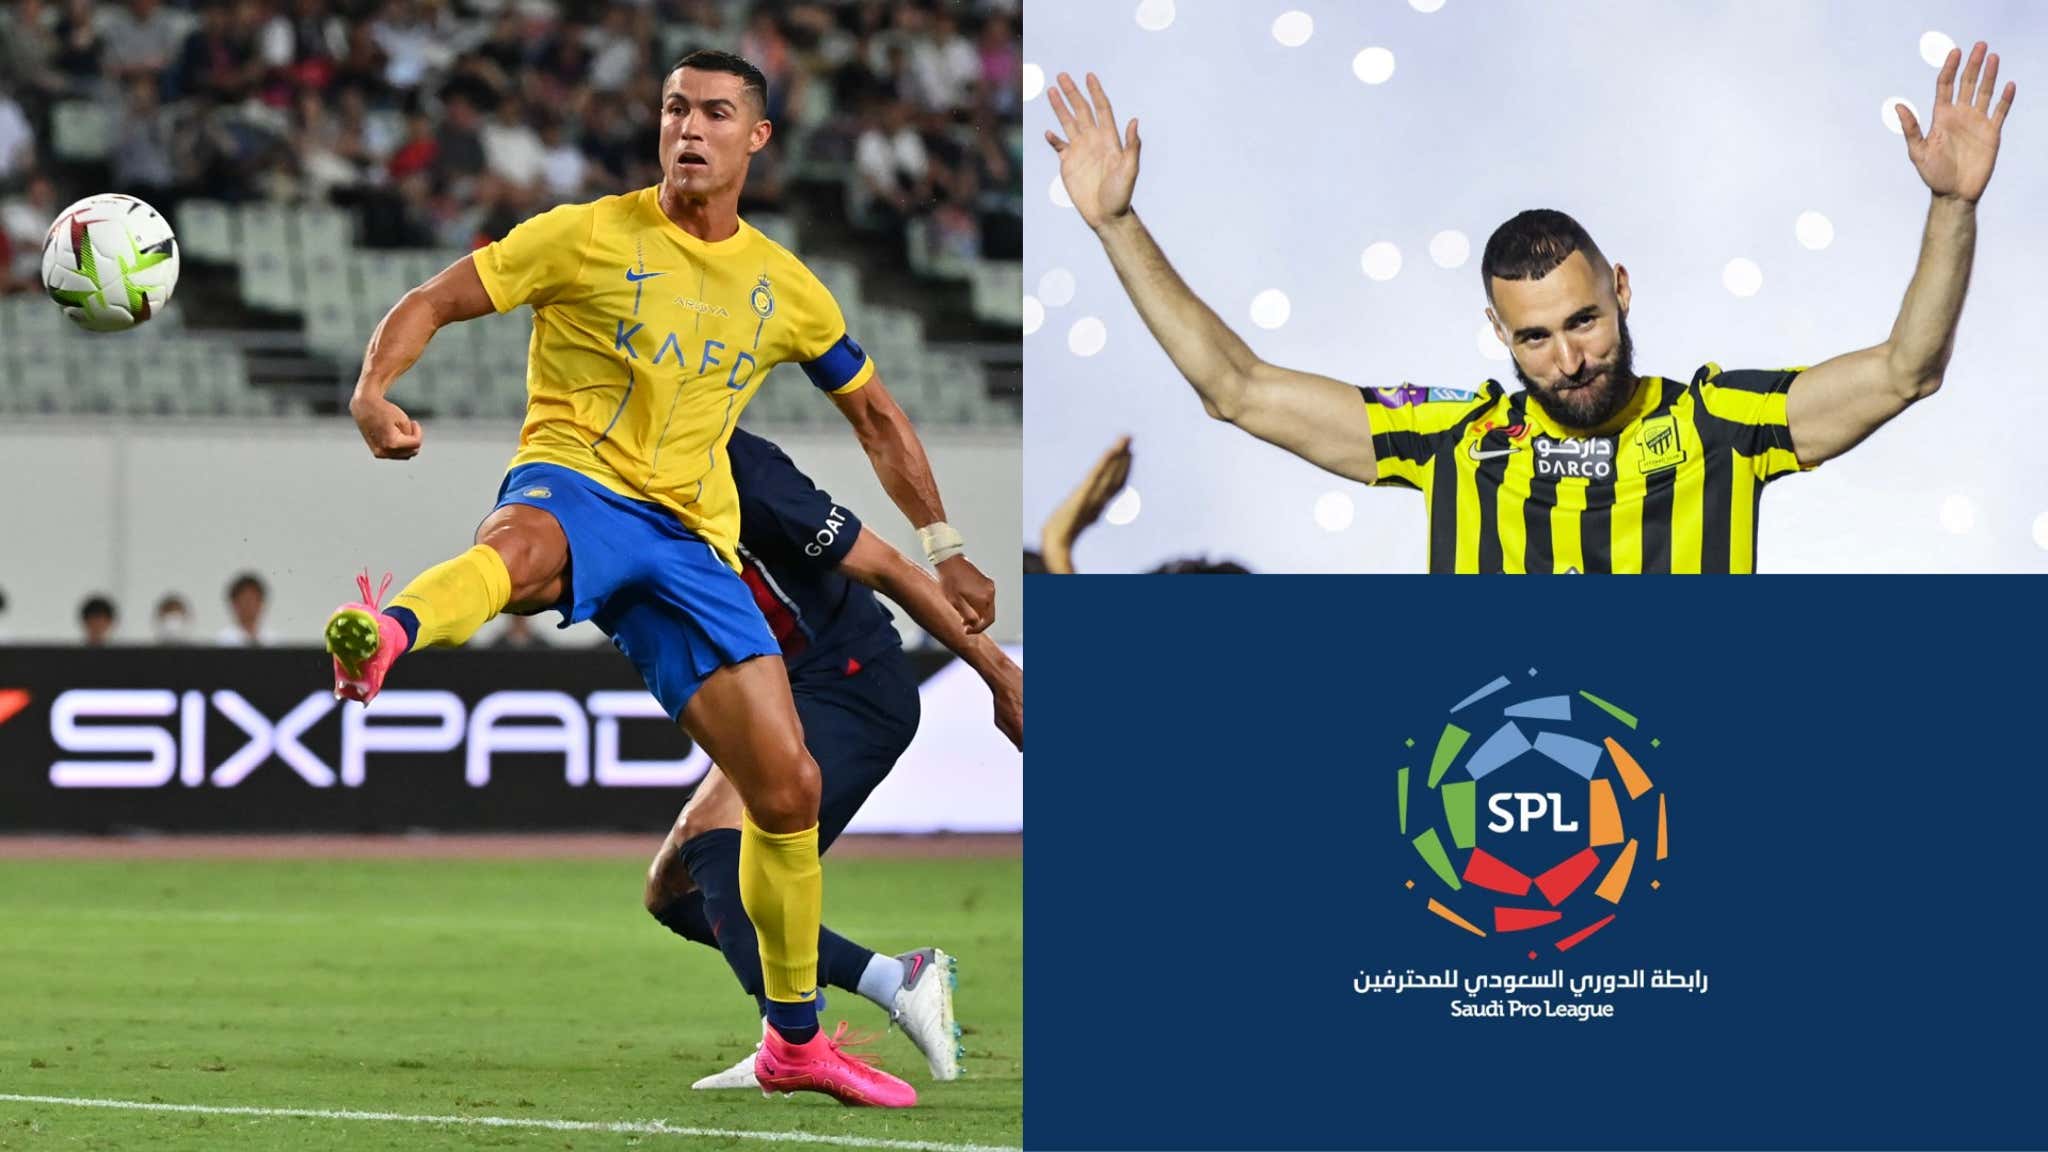 How to watch and live stream the Saudi Pro League in the 202324 season